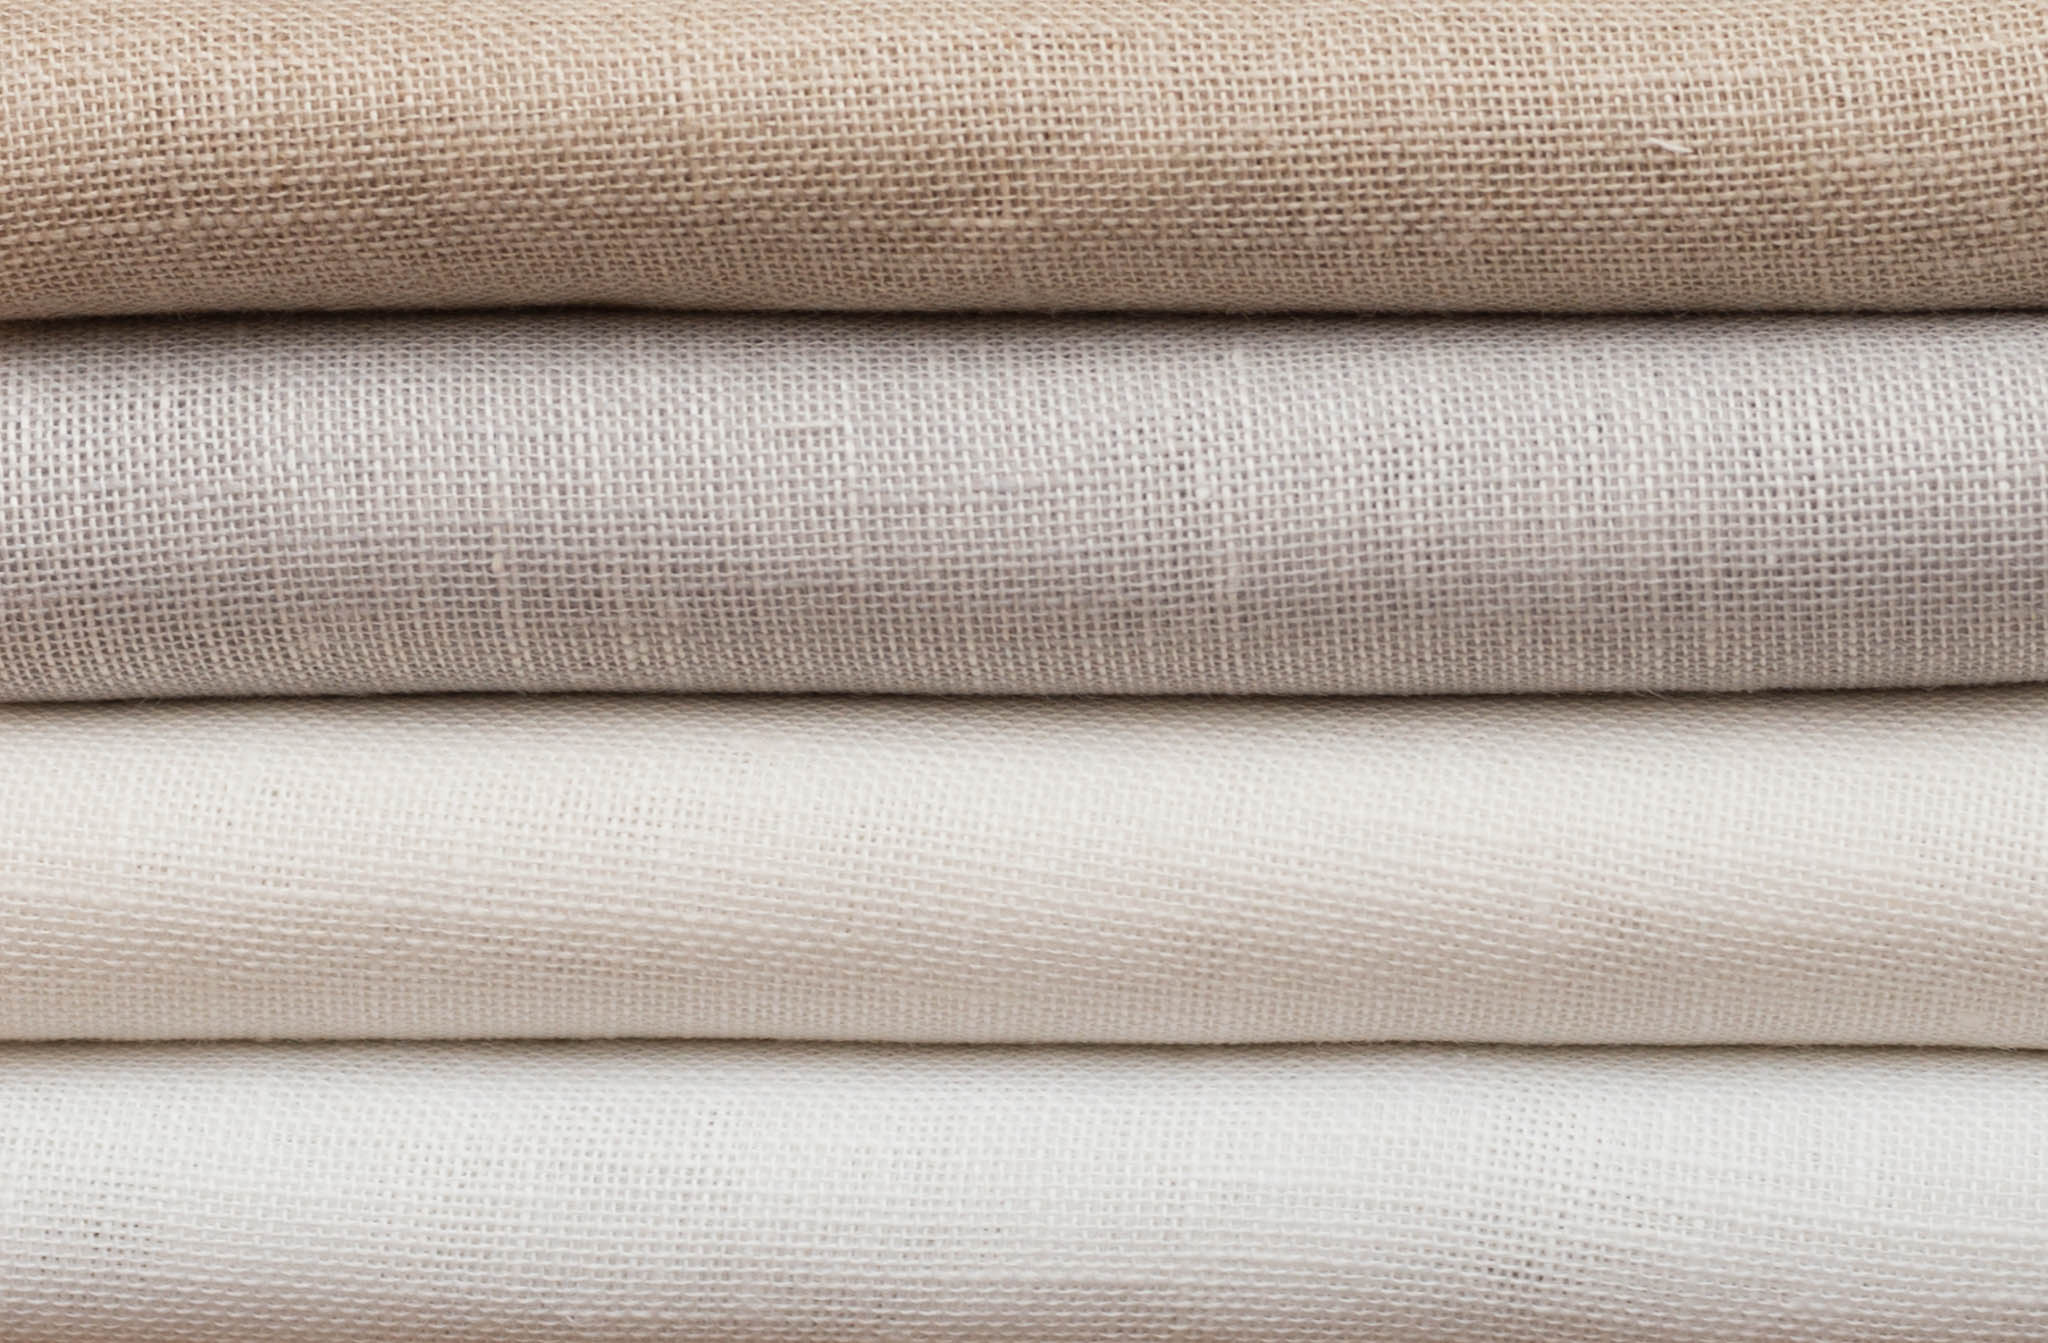 More about our fabric collections